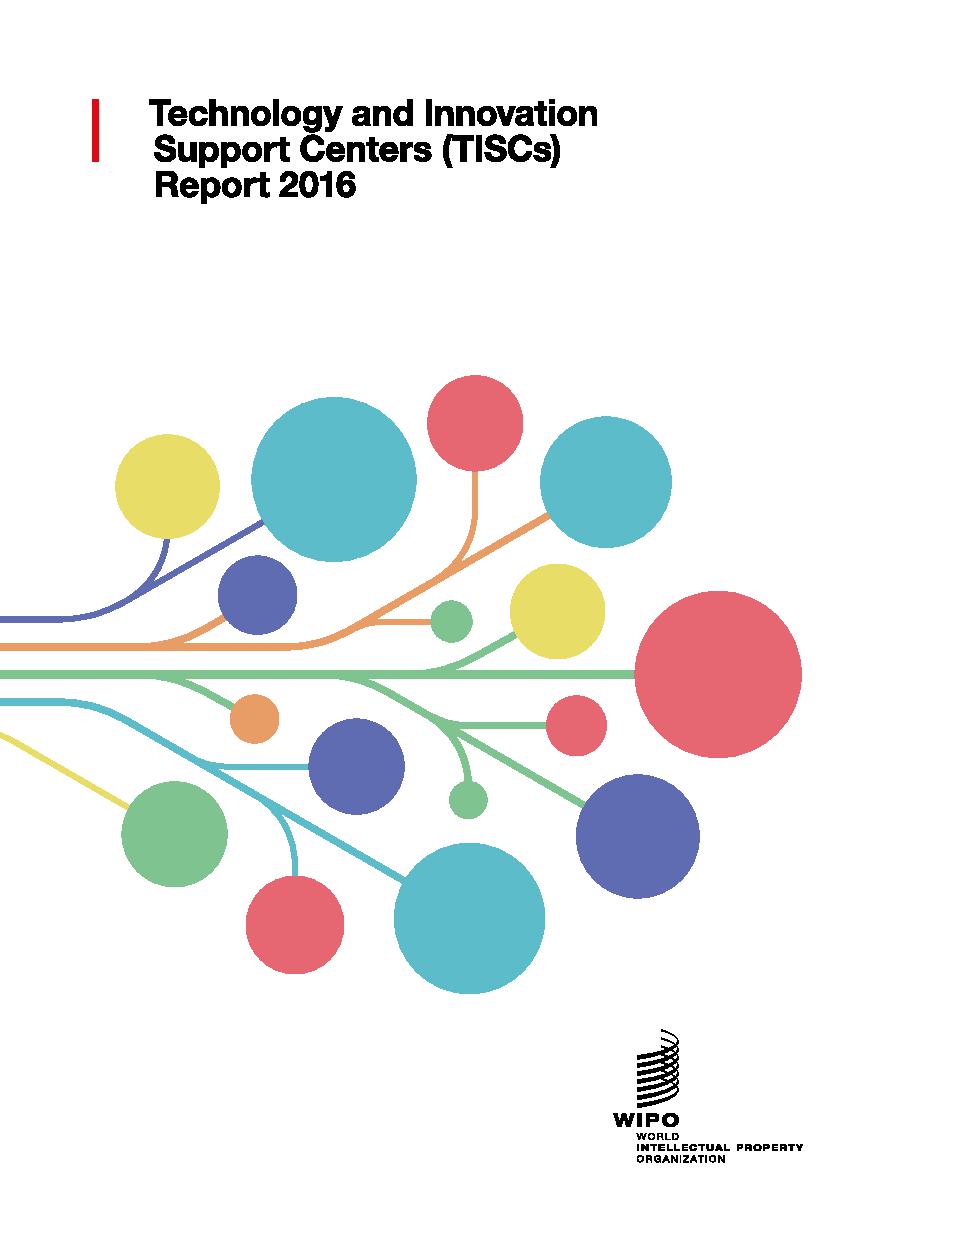 Technology and Innovation Support Centers (TISCs) Report 2016